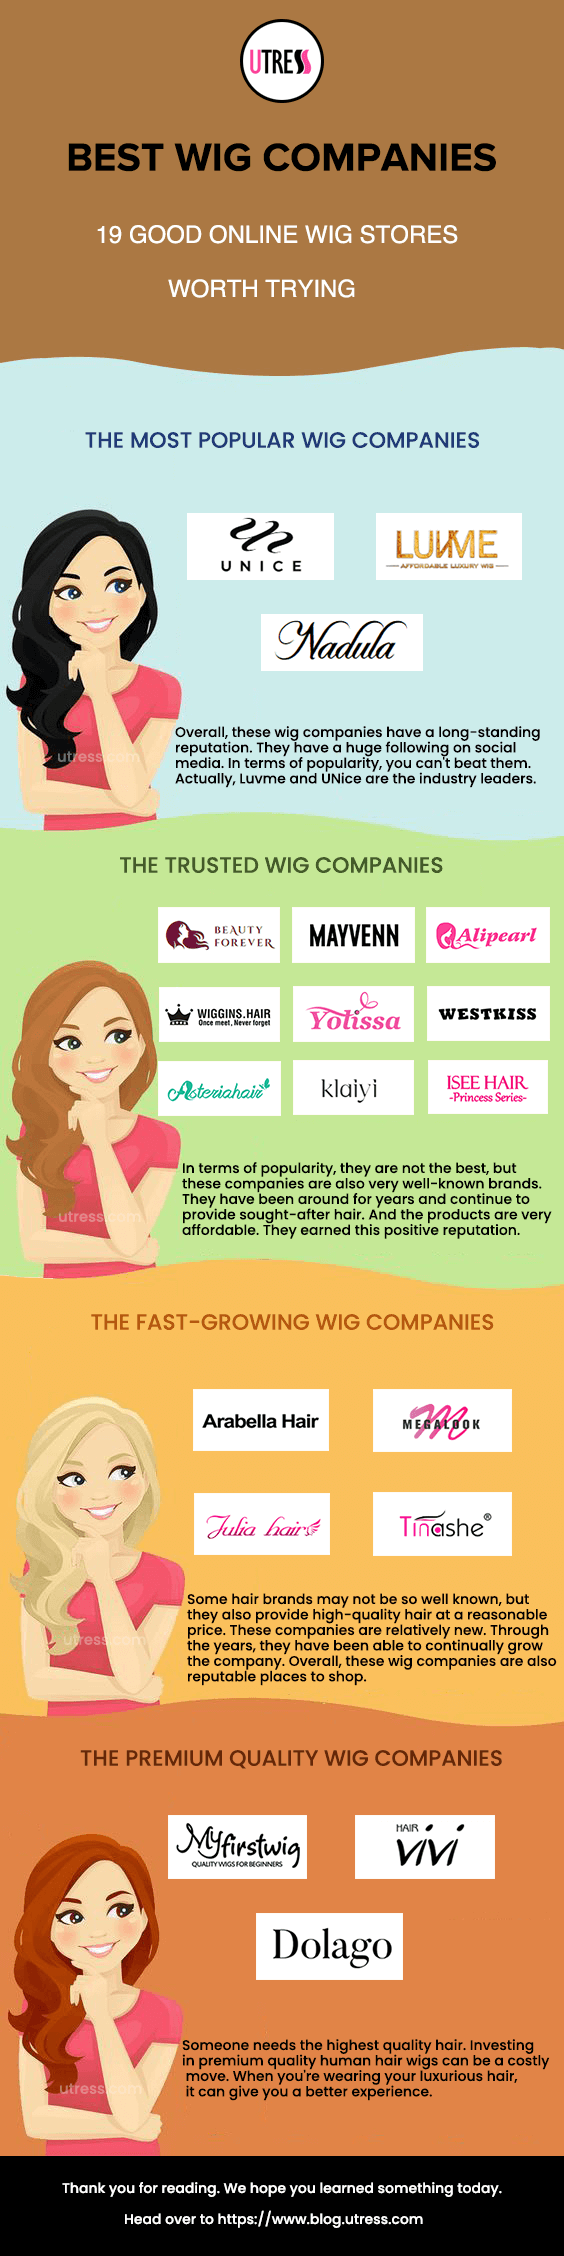 [infographic]best wig companies